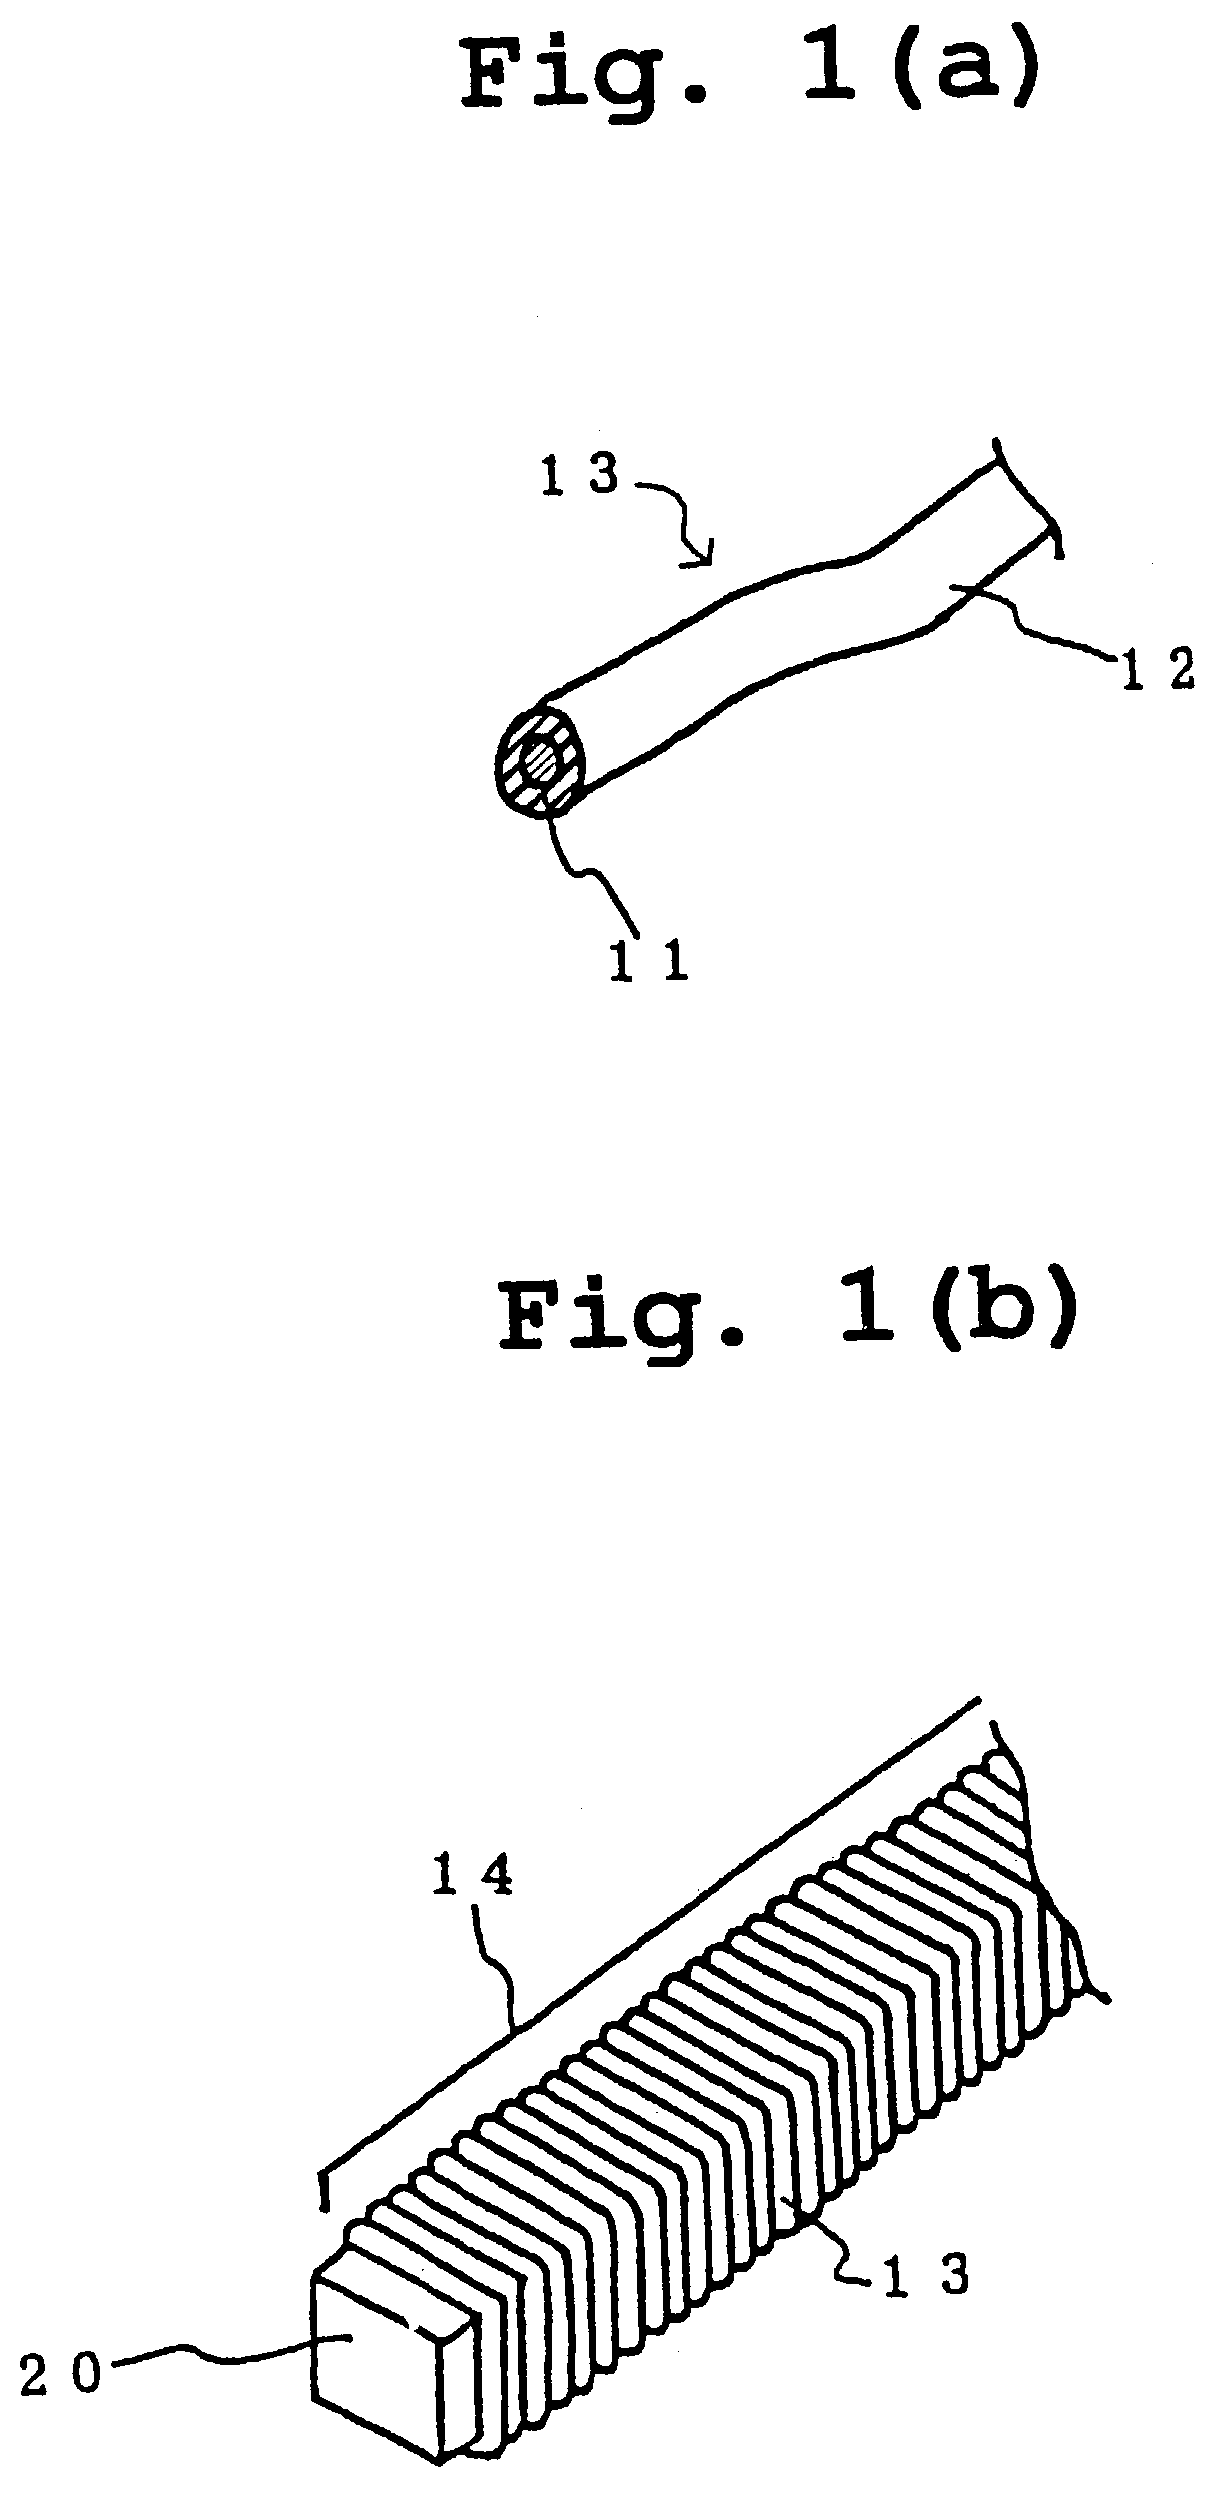 Method of manufacturing an anisotropic conductive film